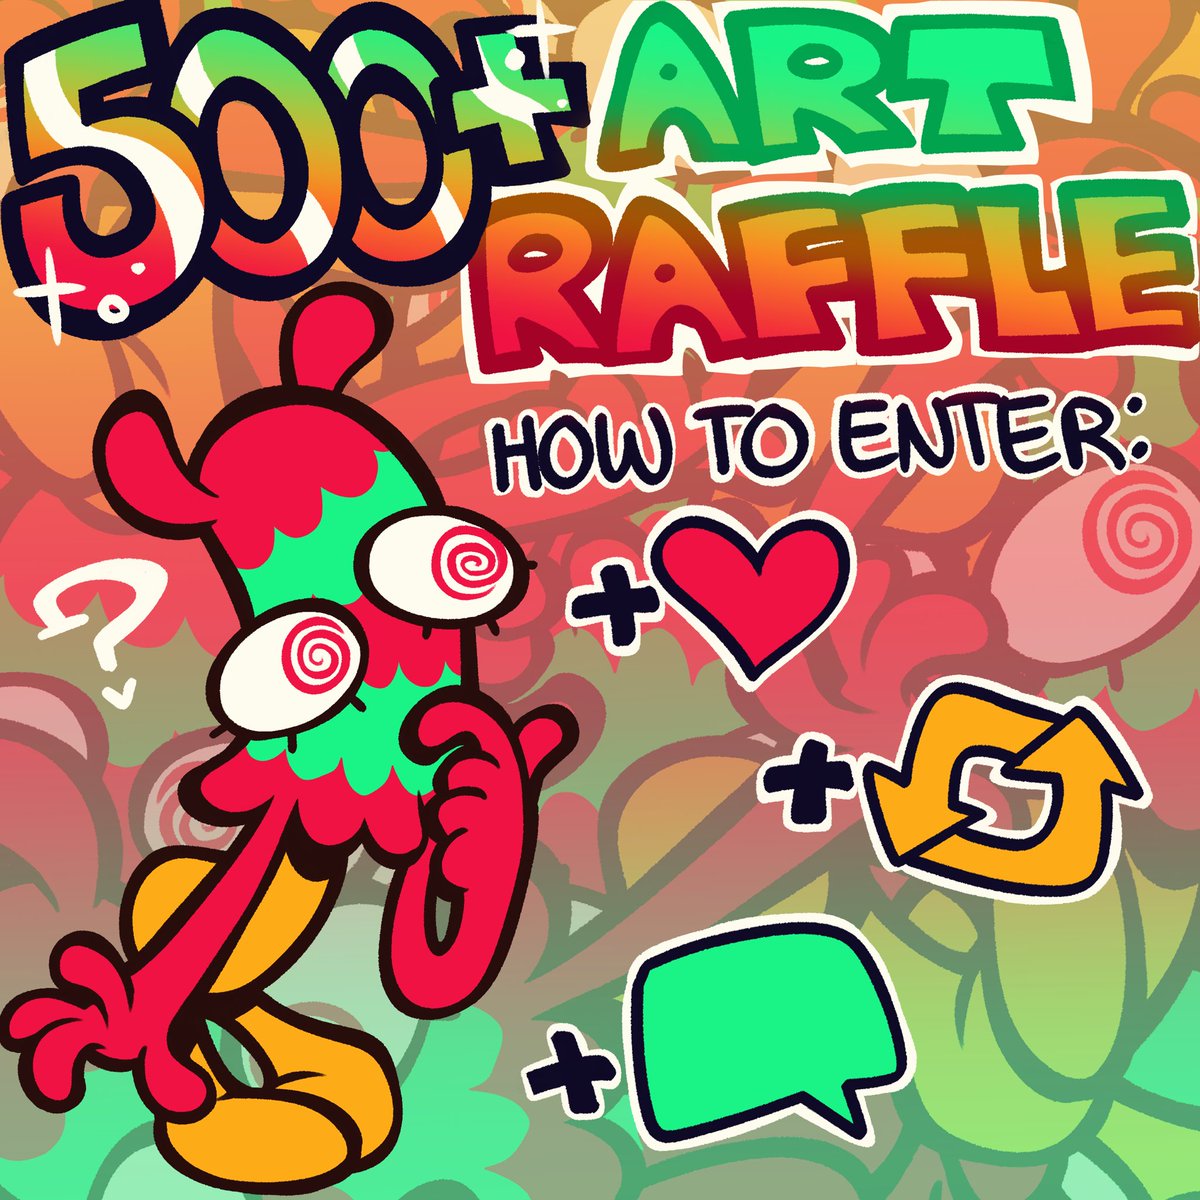 THANK YOU ALL FOR THE SUPPORT!!! 

✨JOIN THE MIMICSHROOM ART RAFFLE ✨

How to enter:

🍄 Like this post
🍄 Retweet this post 
🍄 Leave a comment with a character ref and #ArtRaffle500

💡ART RAFFLE ENDS ON MAY 1ST💡
#ArtRaffle #artmoots #artshare